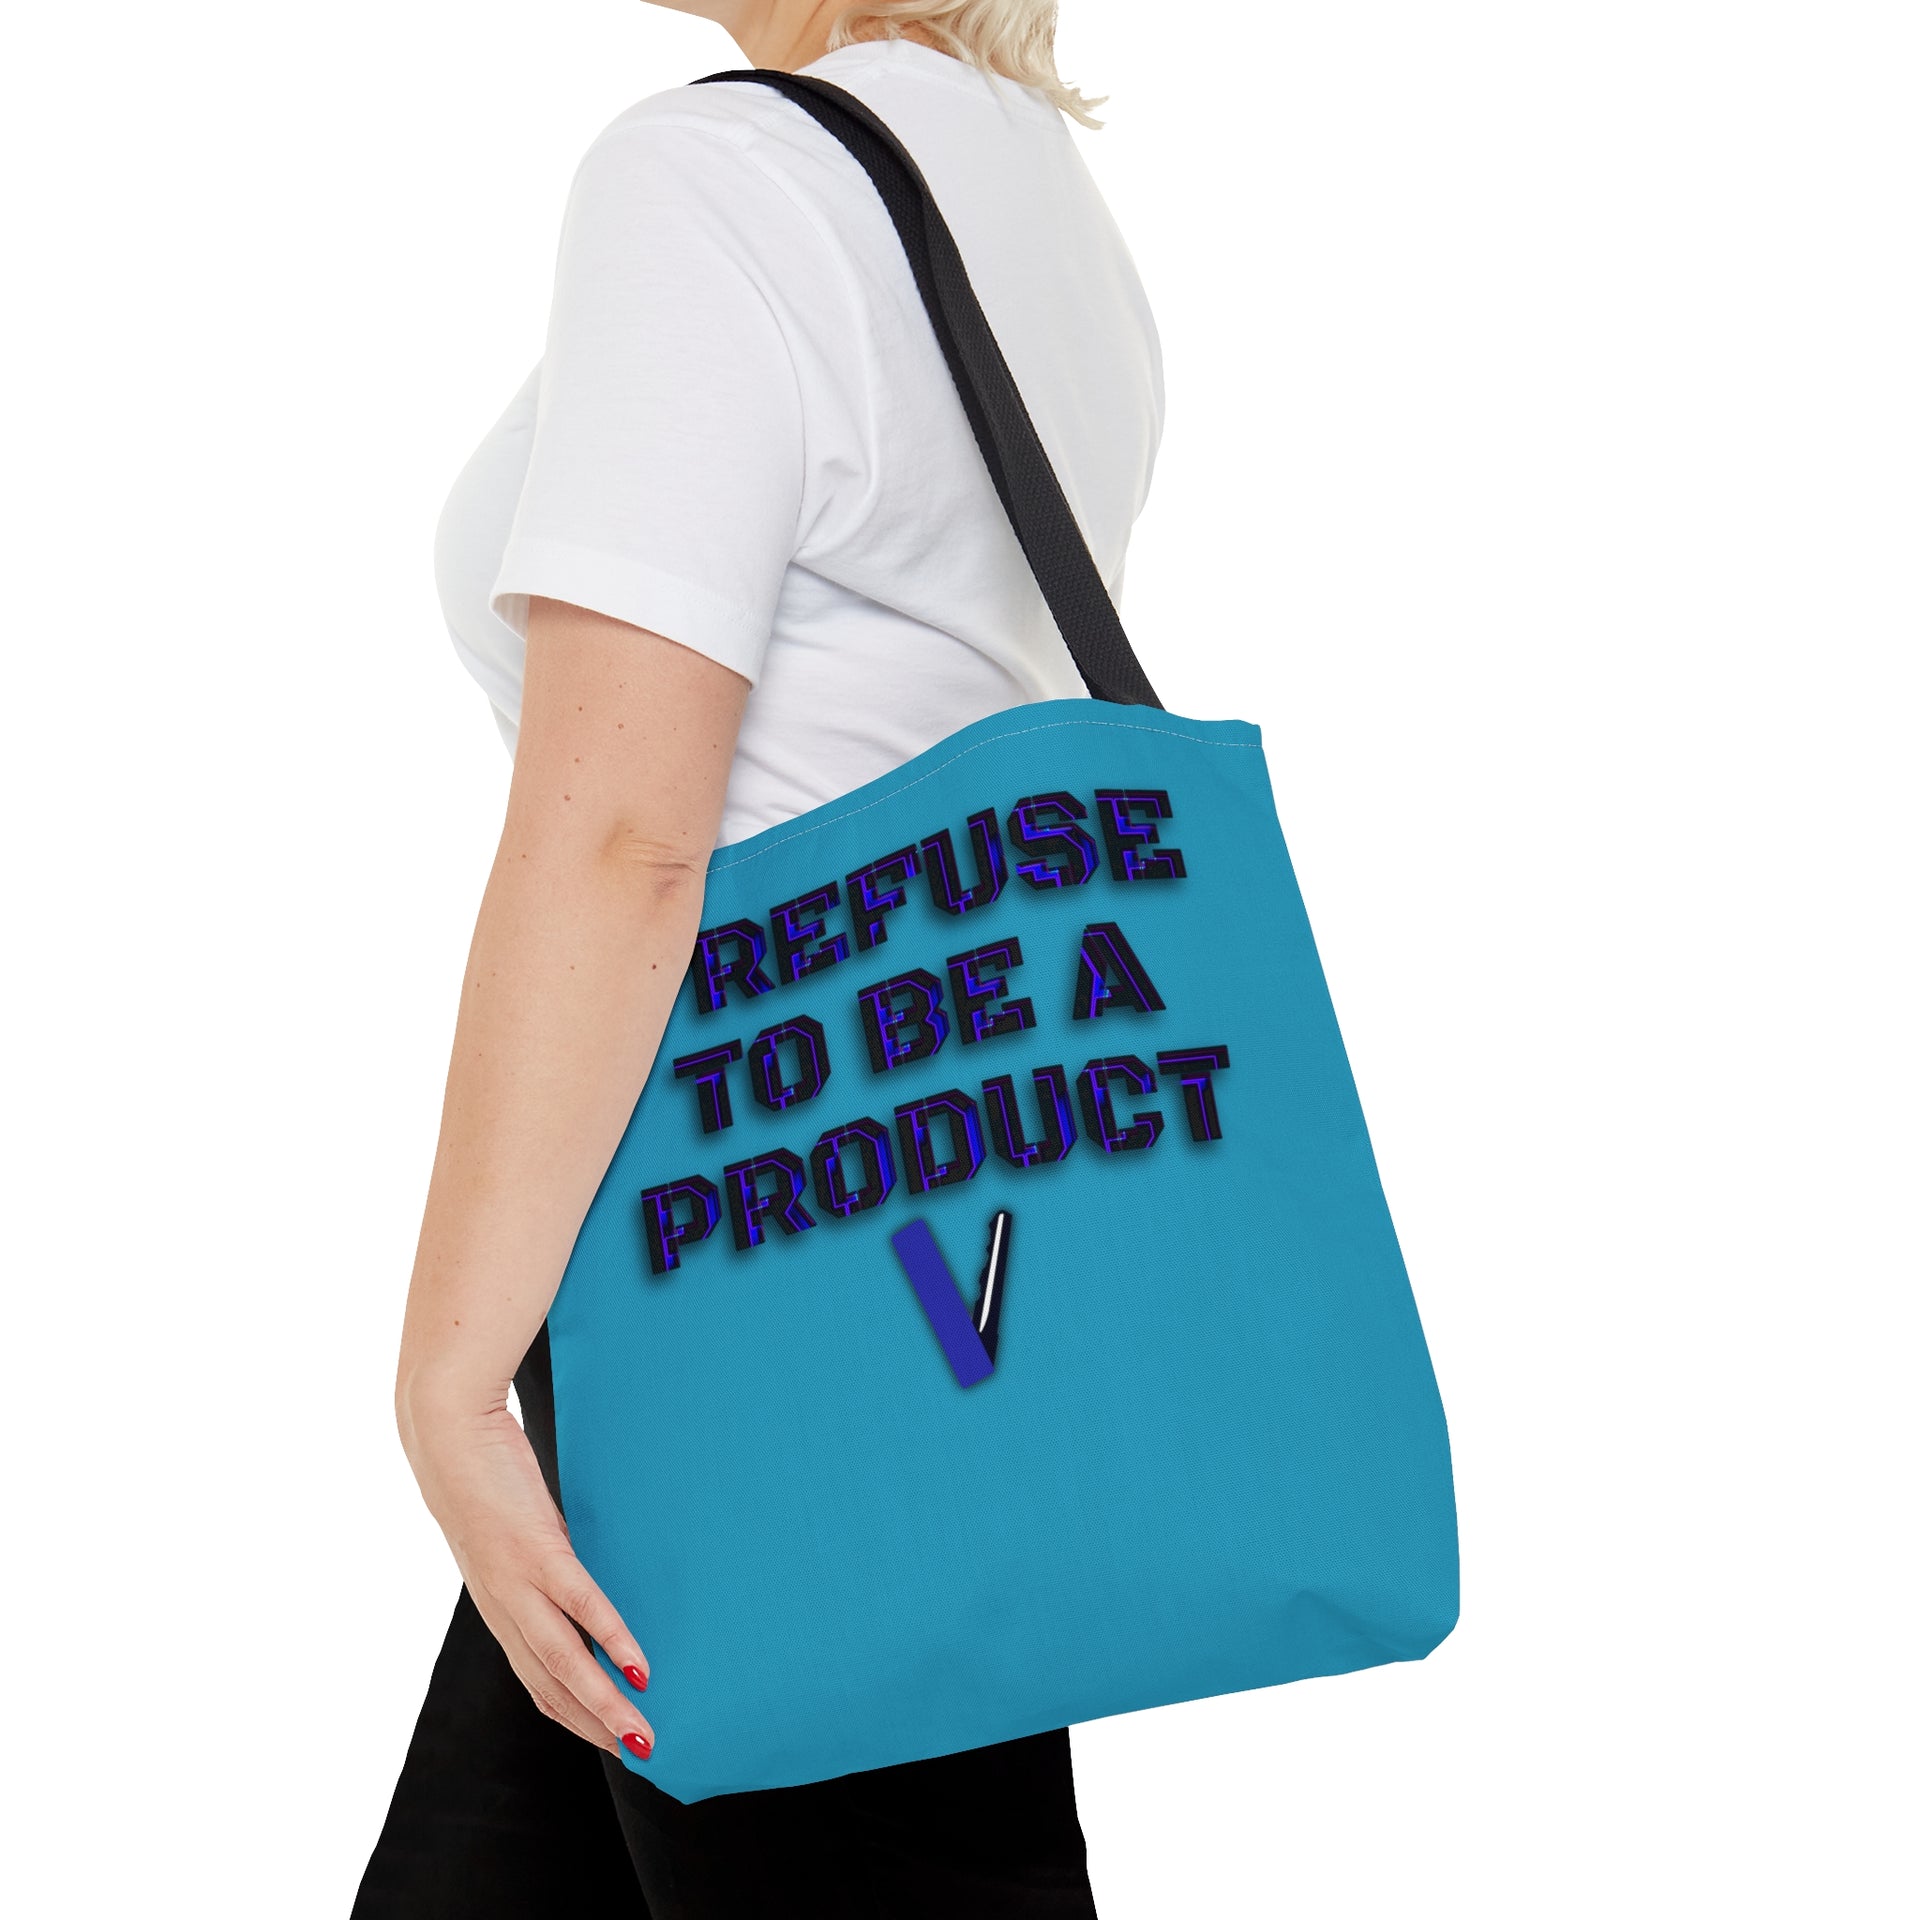 Not a product Tote Bag